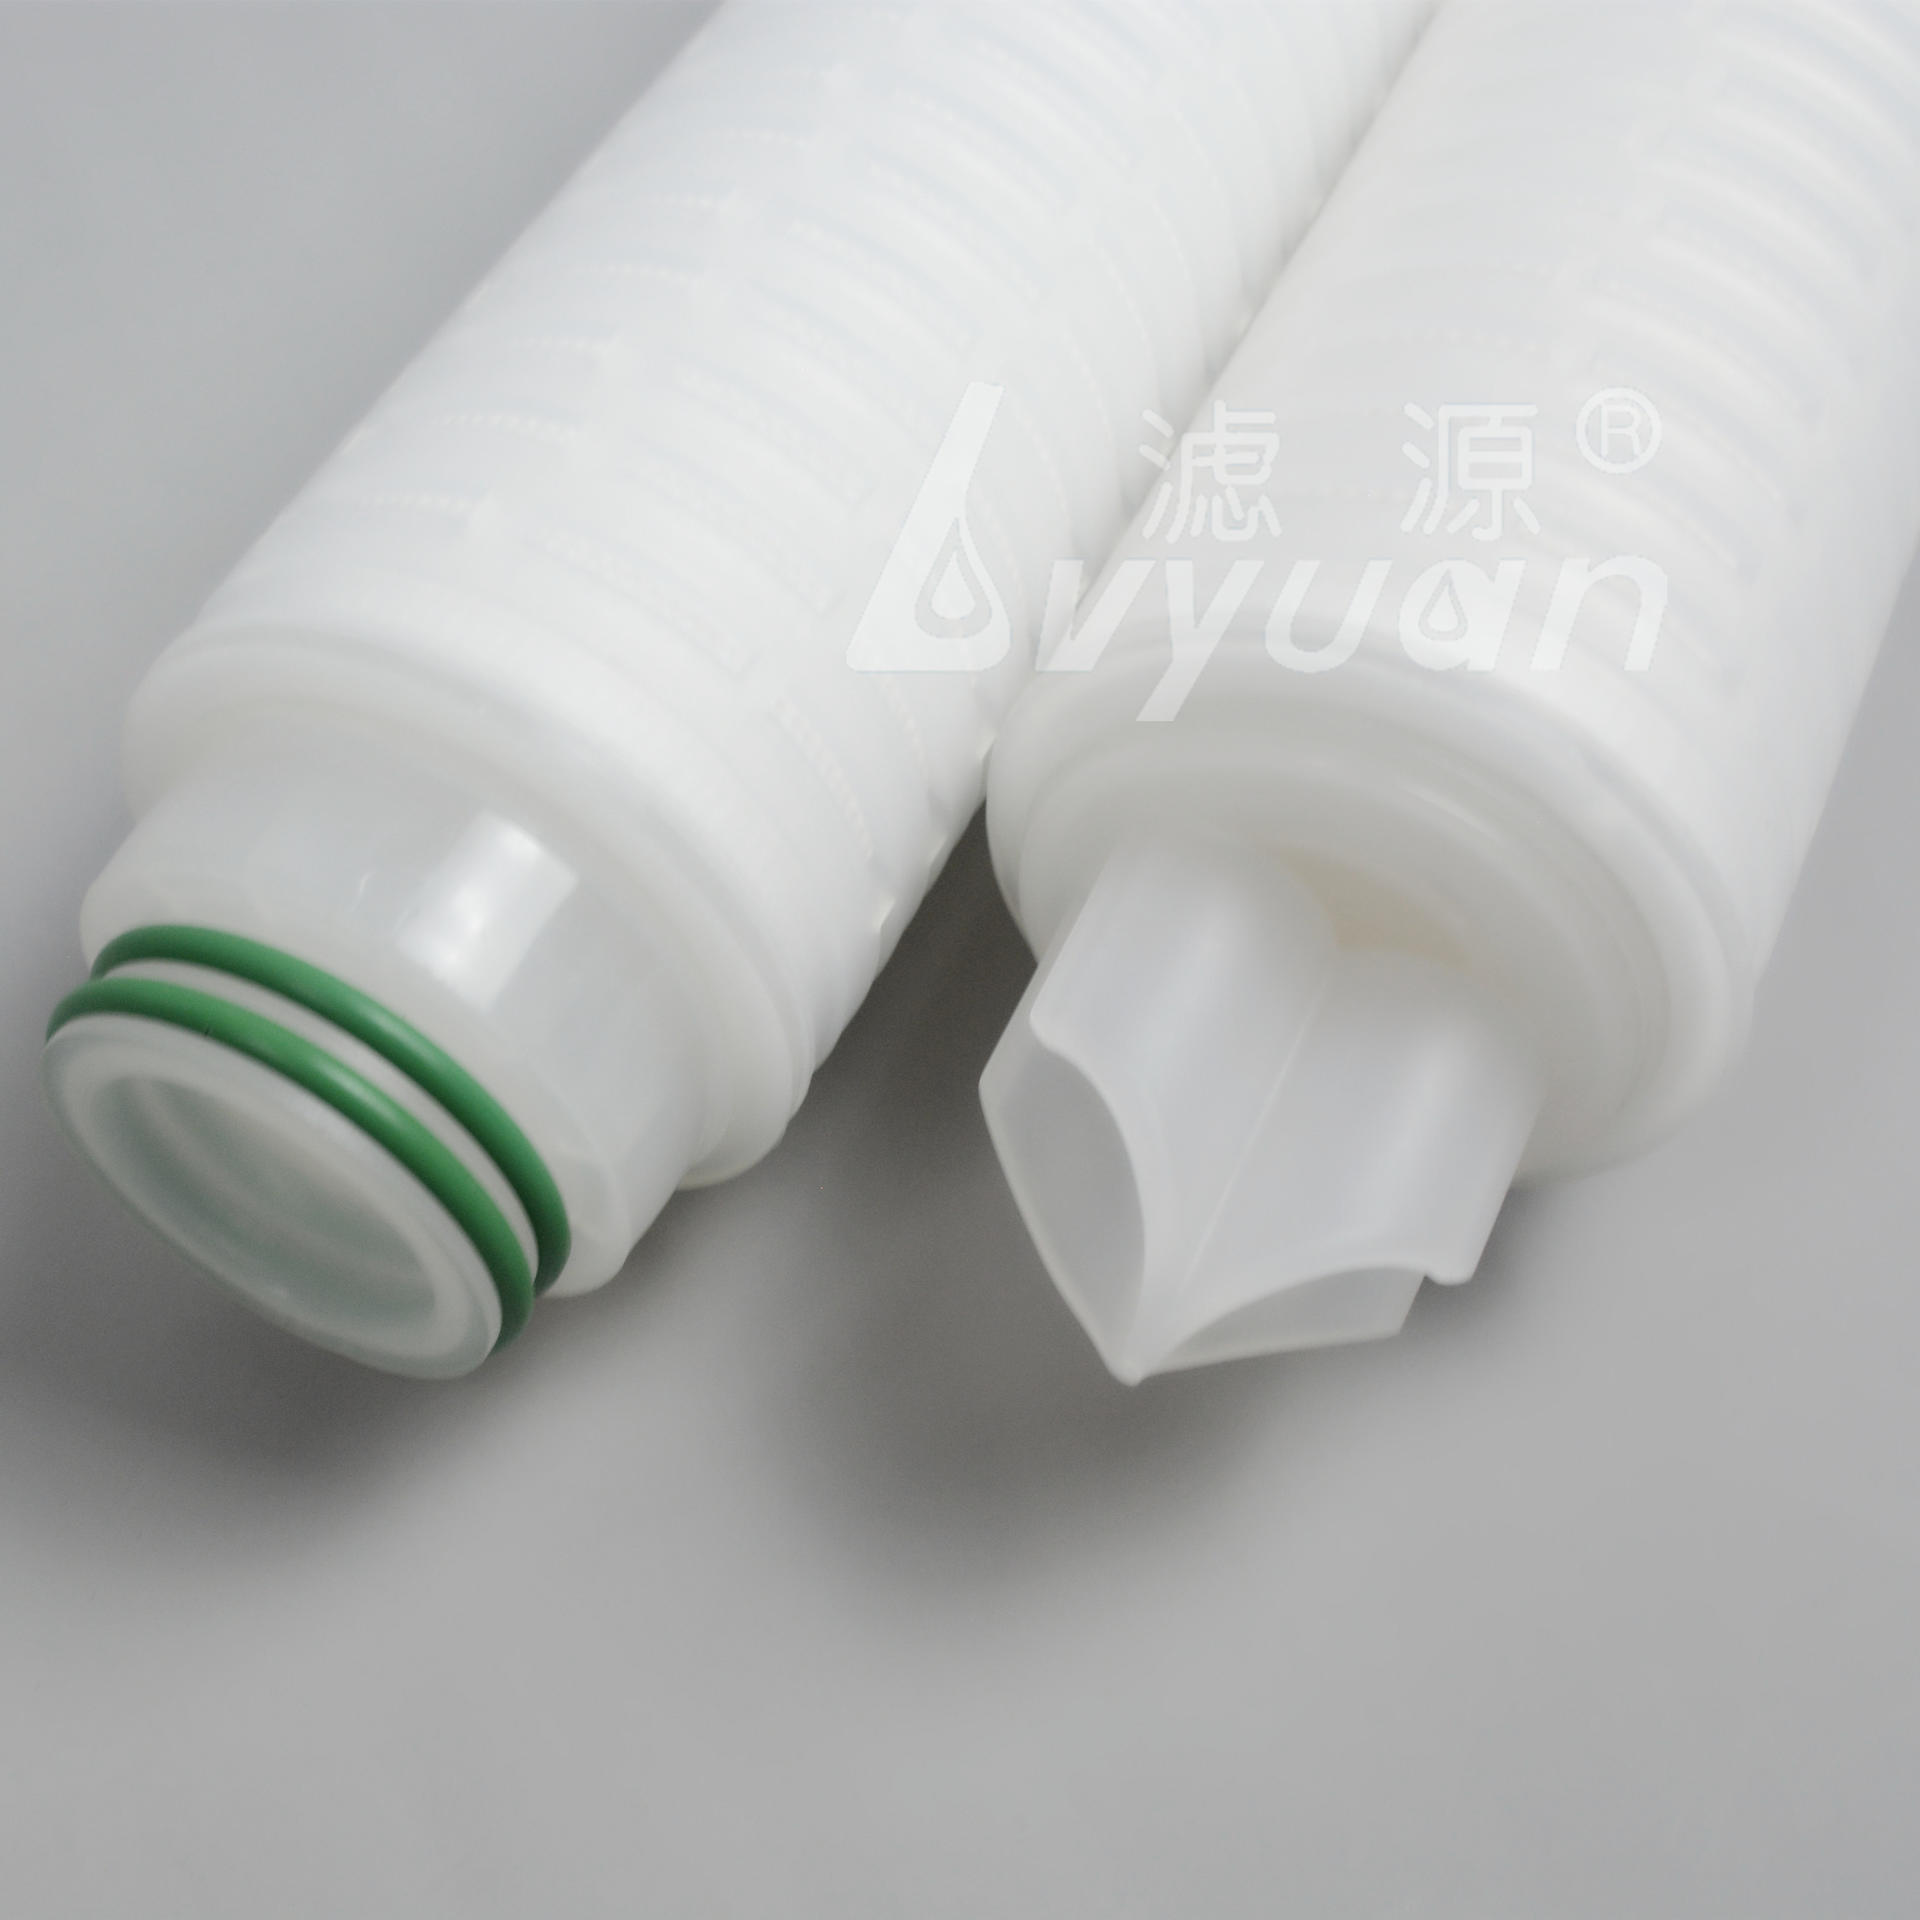 10 20 30 40 inch PVDF Membrane Pleated Filter Cartridge/Filter Element for Liquid Pre-Filtration